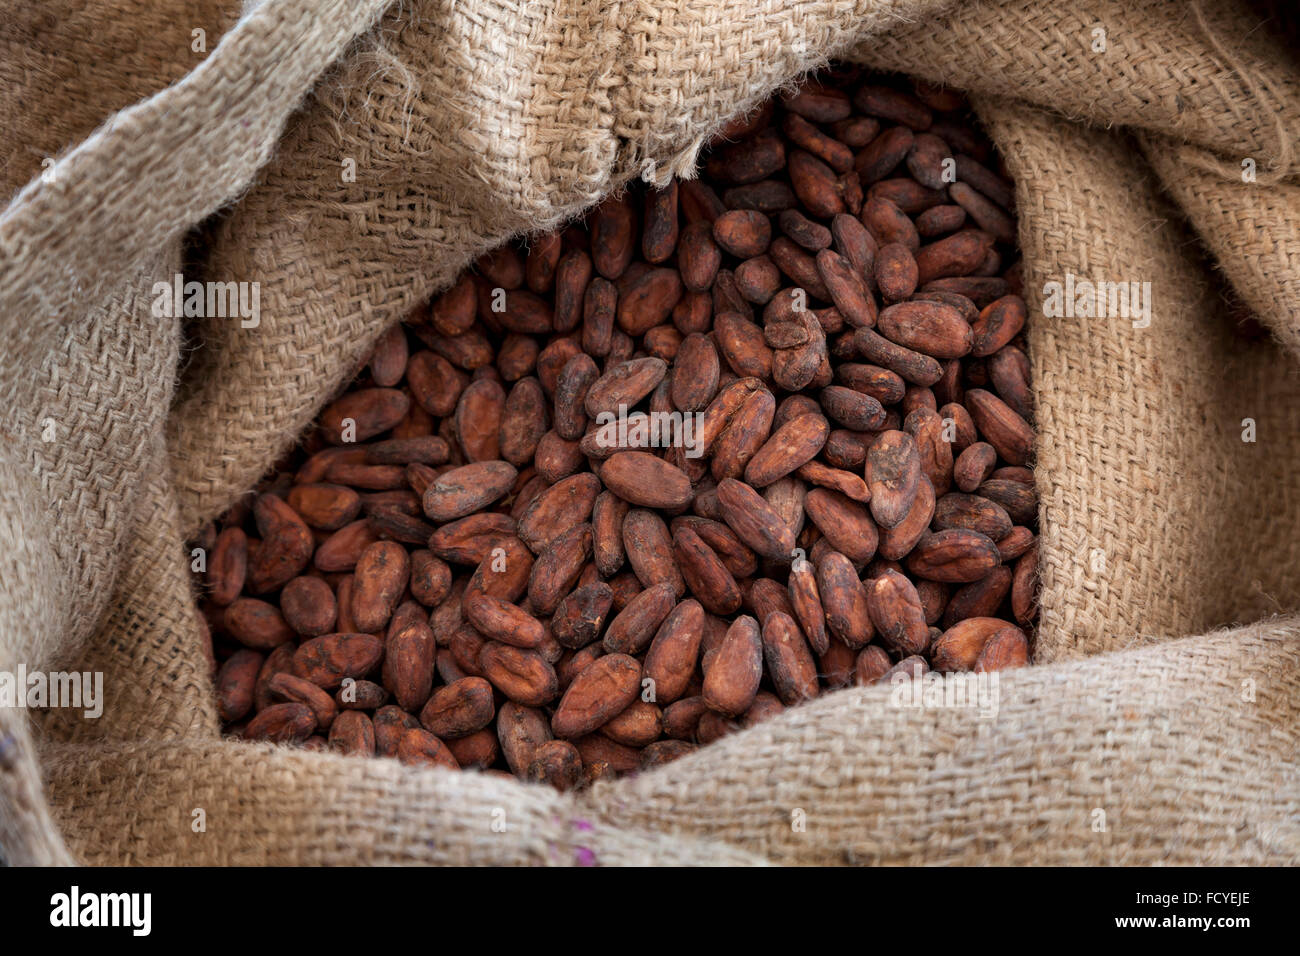 Jute bag full with cocoa beans Stock Photo